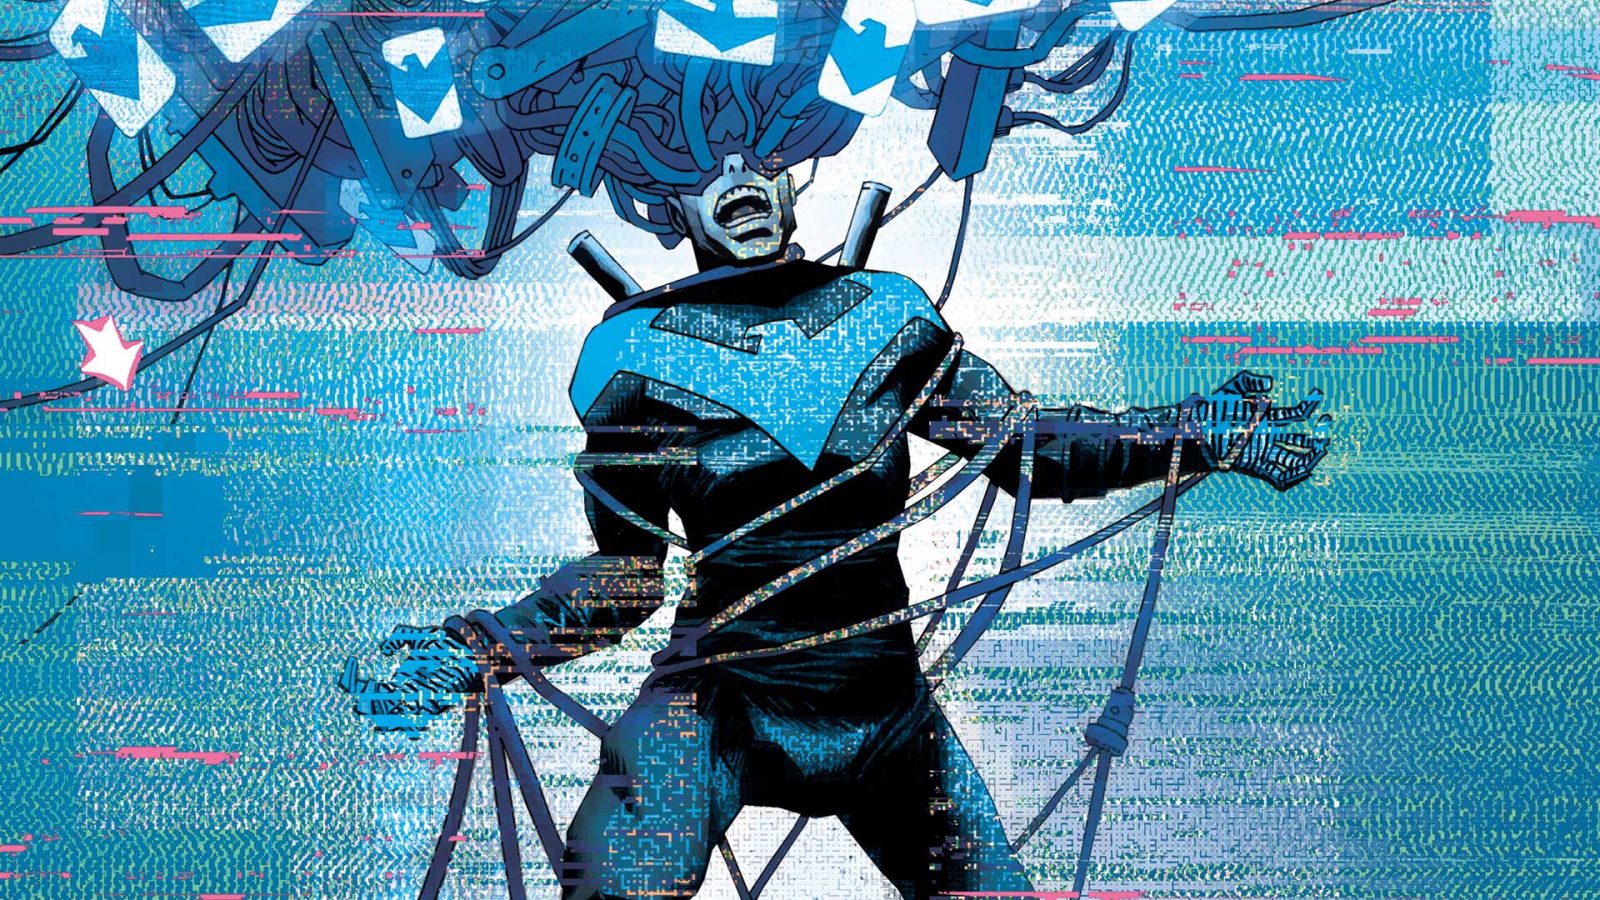 Nightwing #44 Cover by Declan Shalvey SNIP